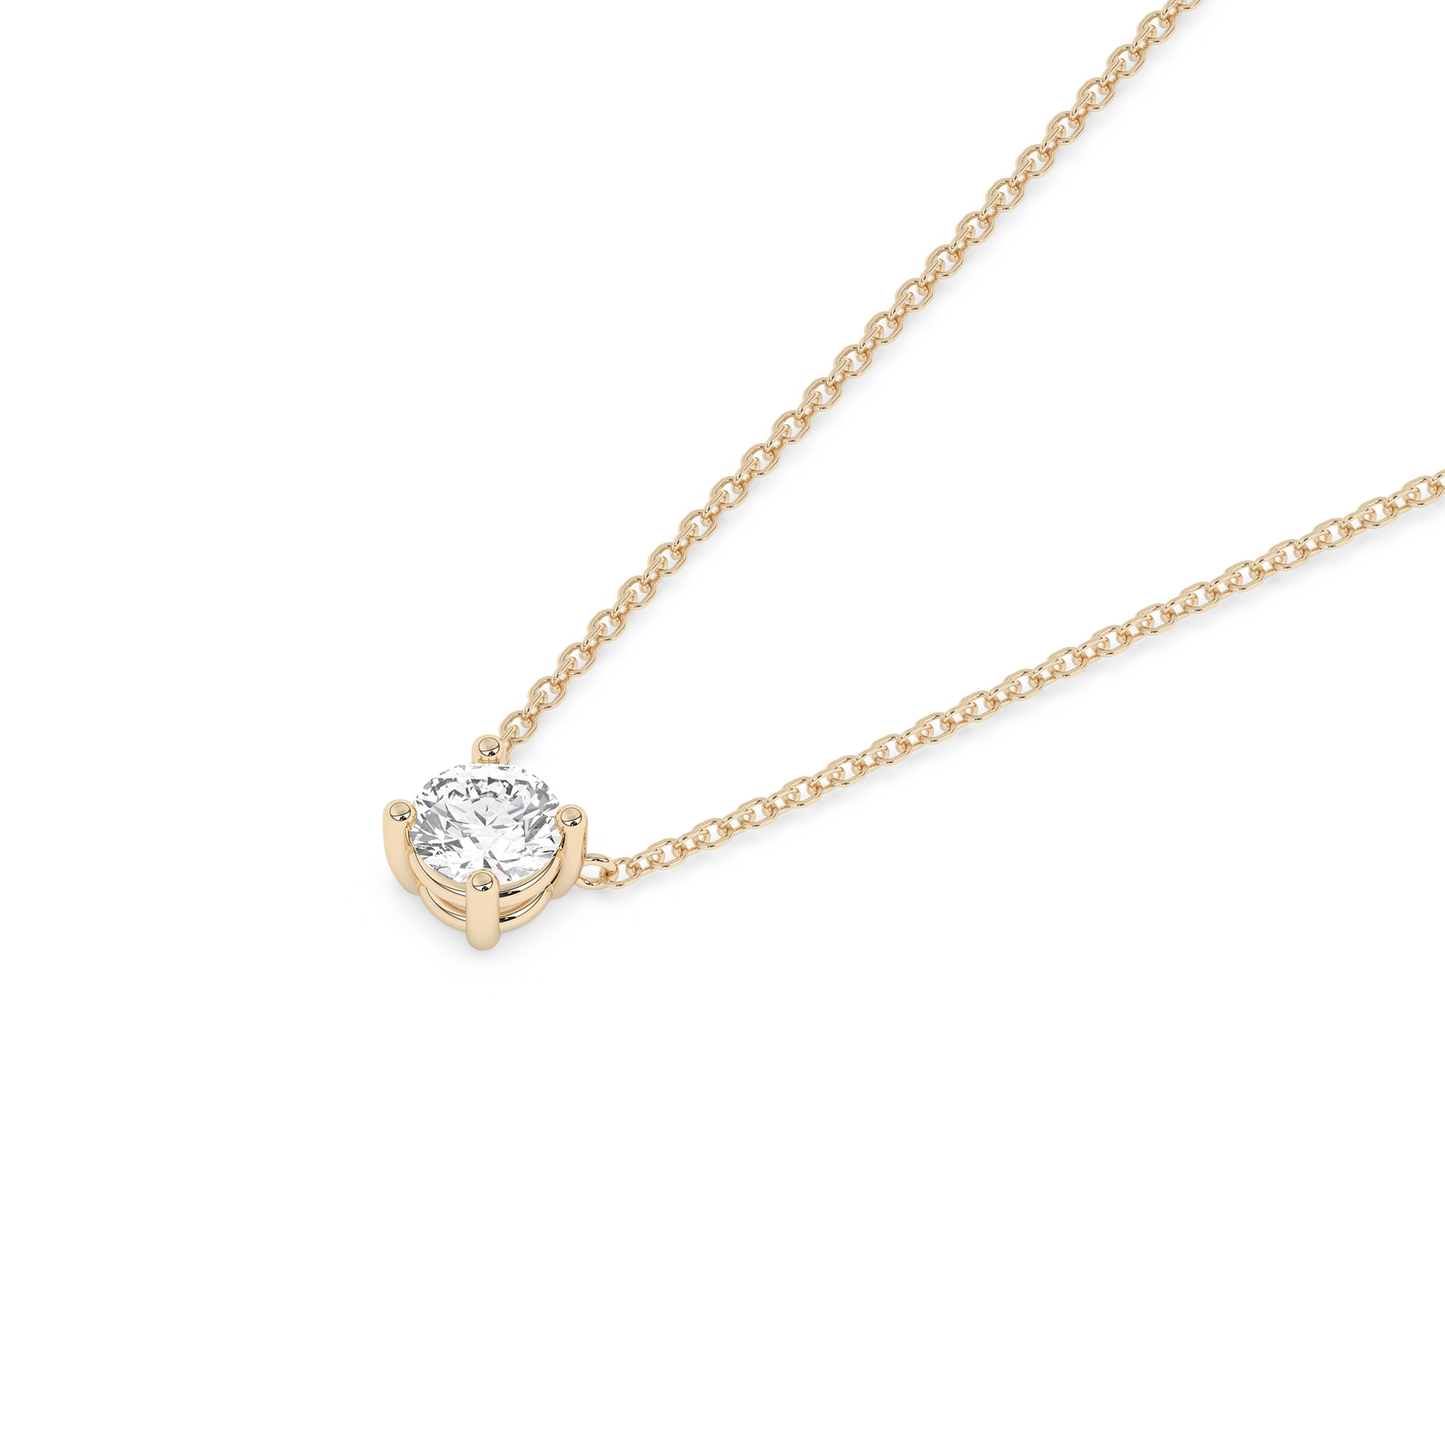 Prong Diamond Necklace Large (0.17 ct.) 14K Yellow Gold